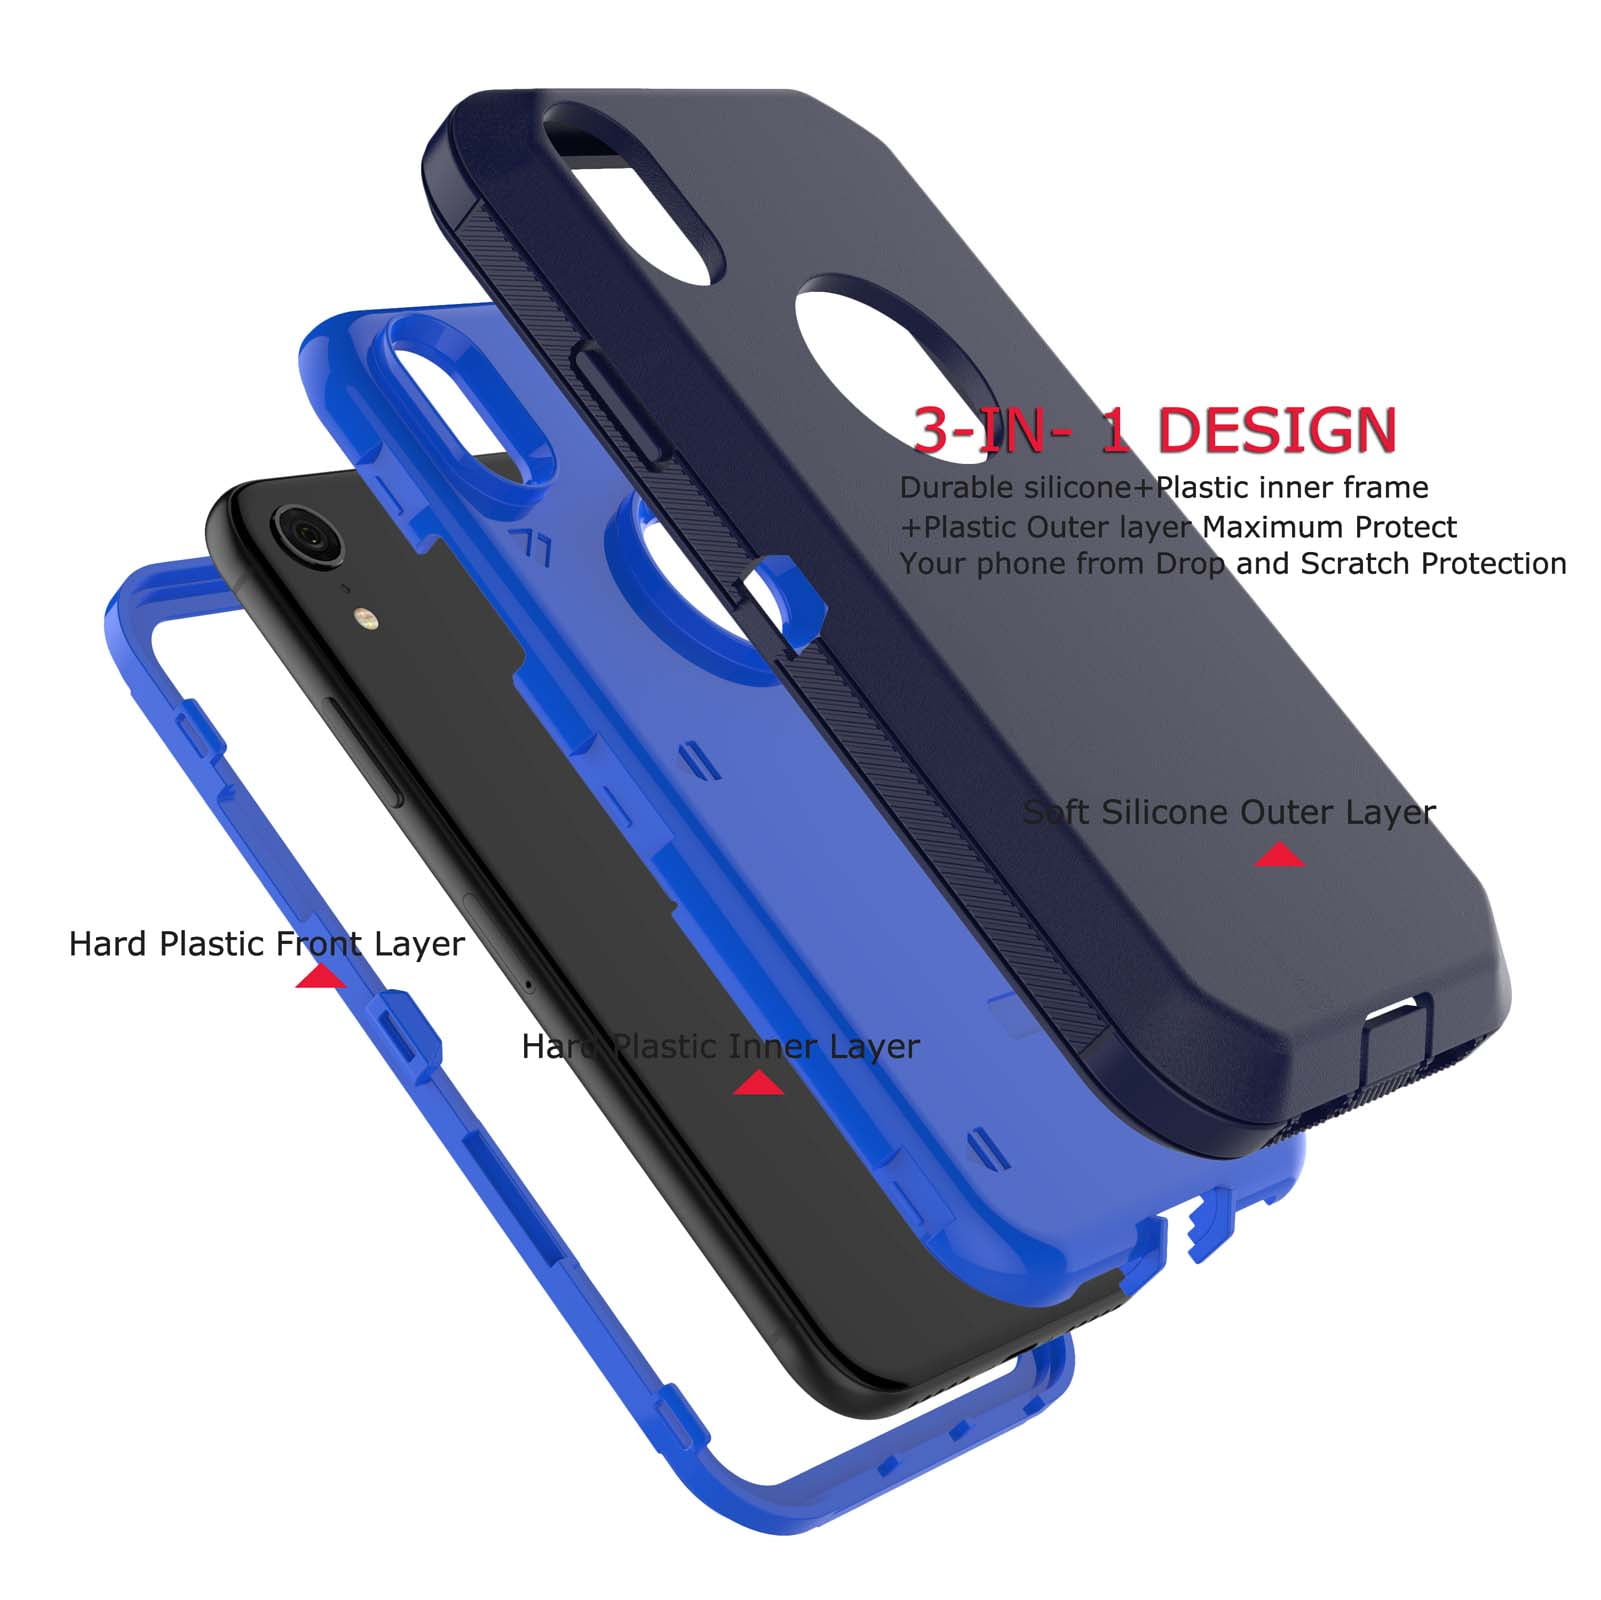 iPhone 11 Cases, Sturdy Phone Case for Apple iPhone 11 6.1 inch, Tekcoo Full-Body Shockproof Protection Heavy Duty Armor Hard Plastic & Shock